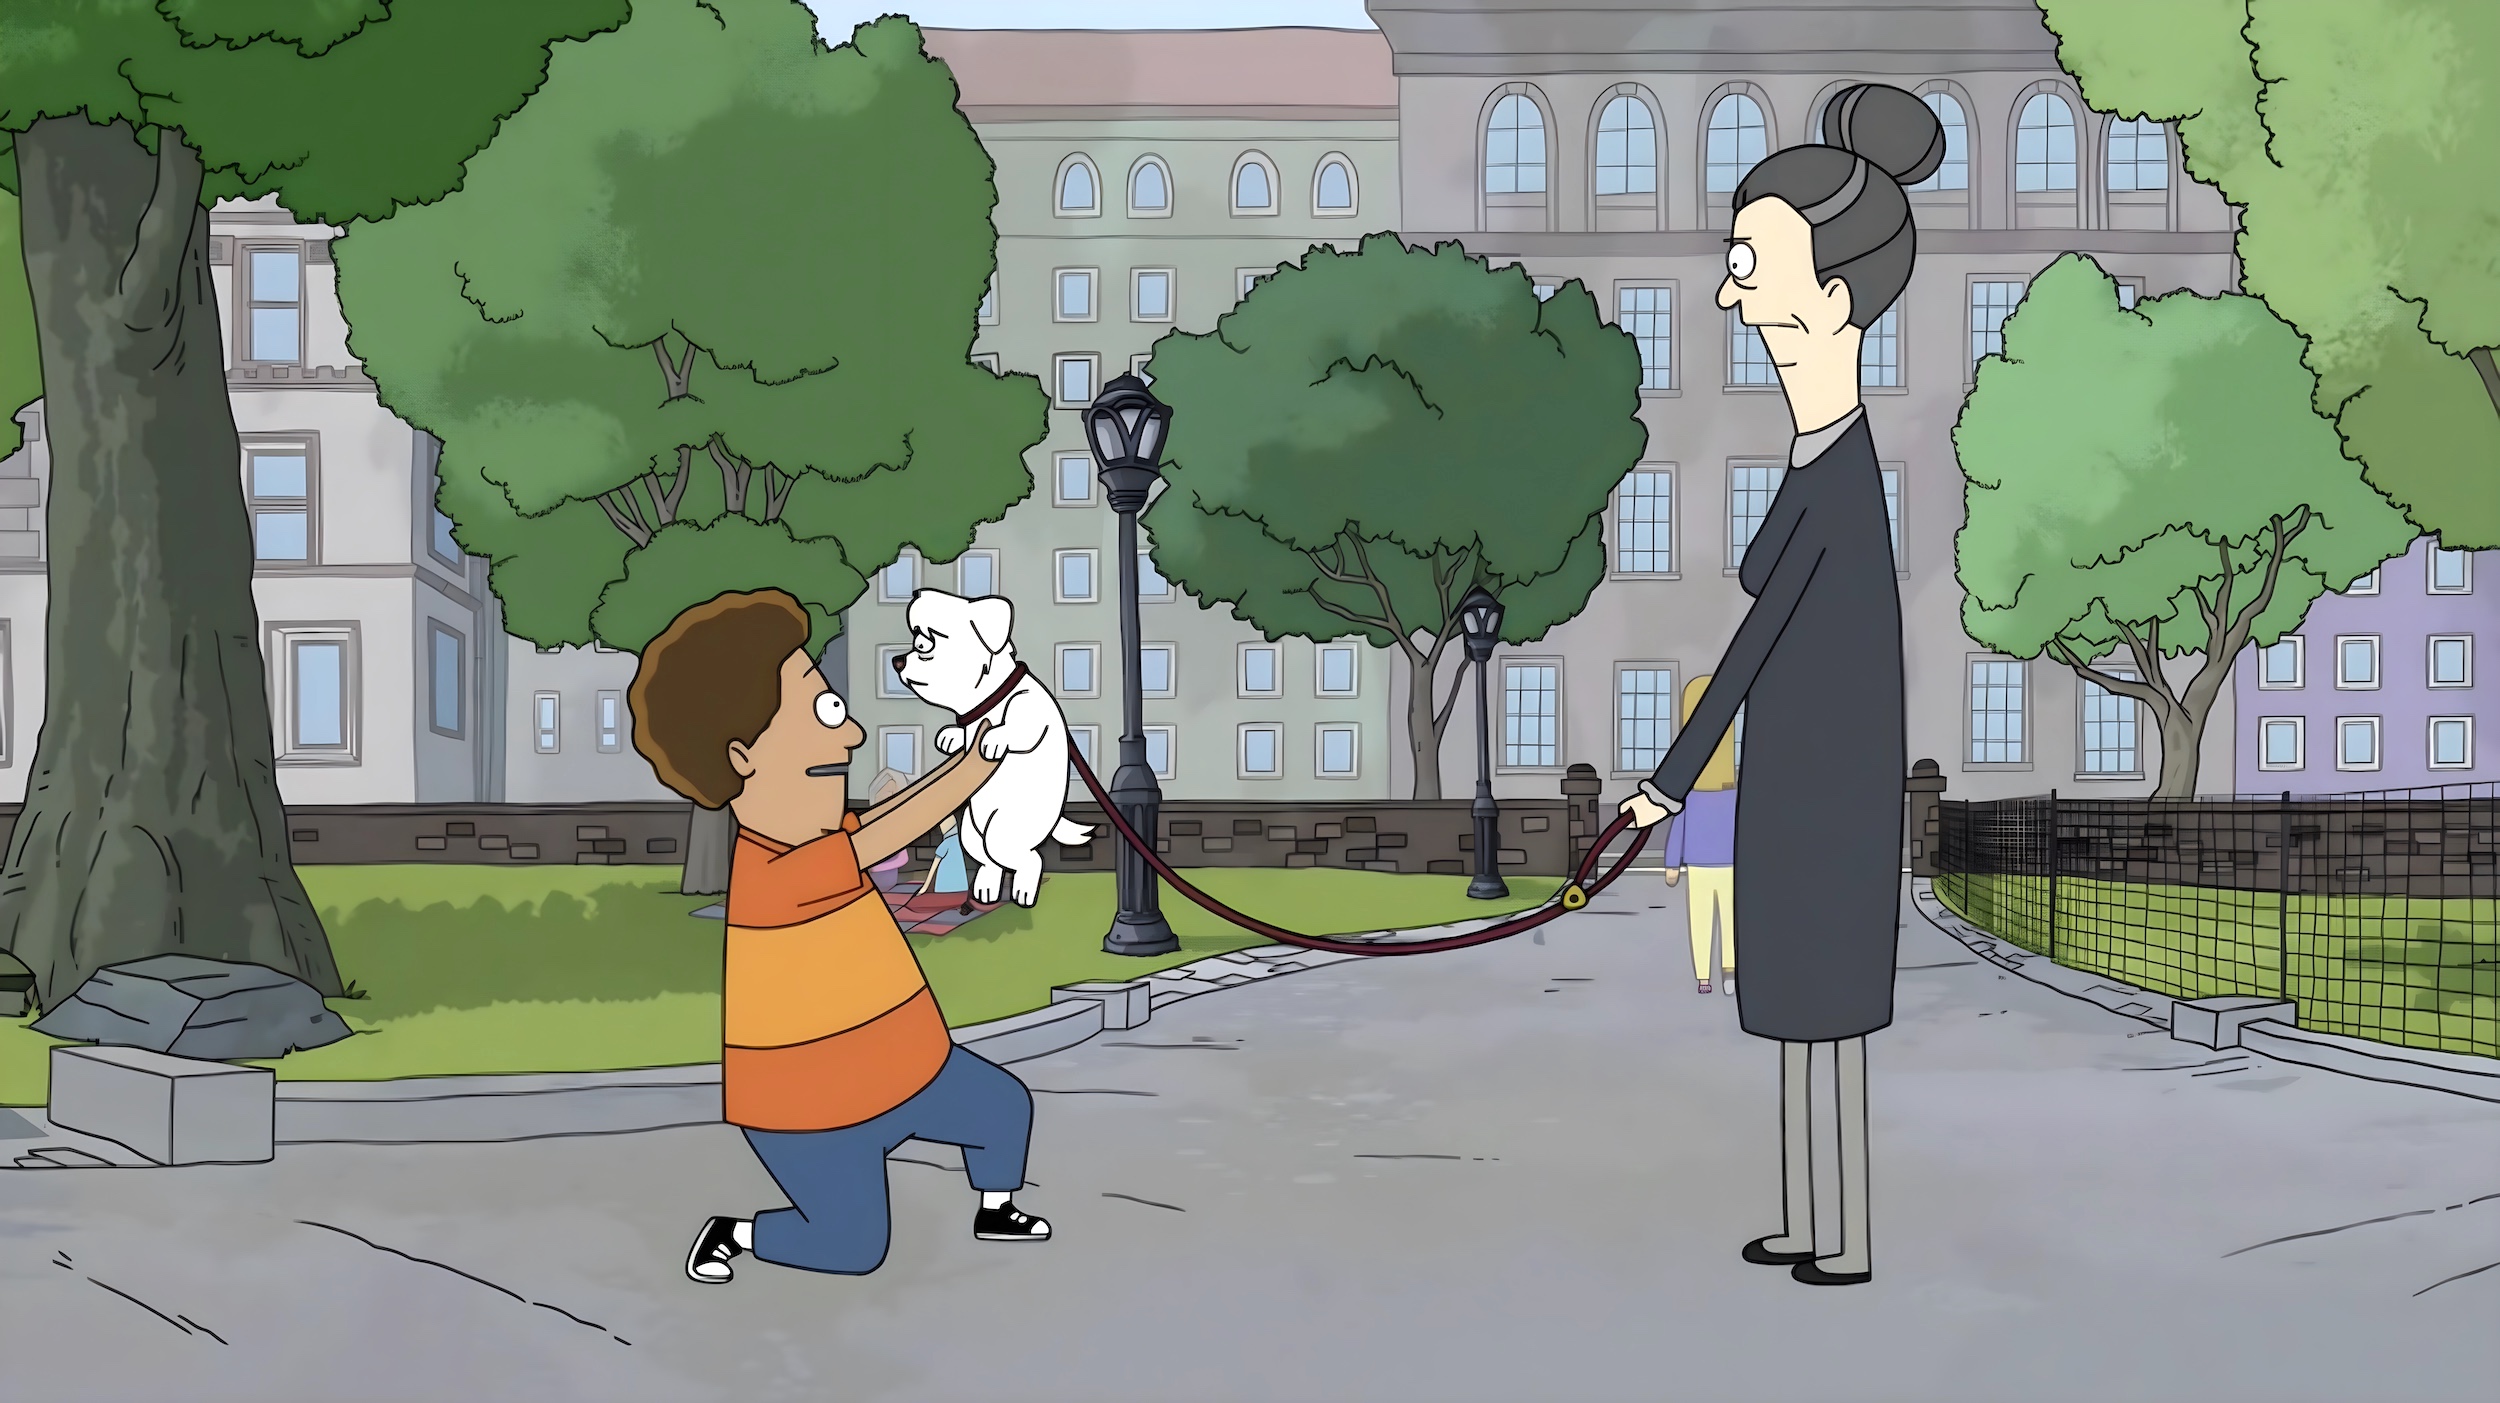 A cartoon of a boy embracing a small dog in a park. An annoyed older woman holds the leash.